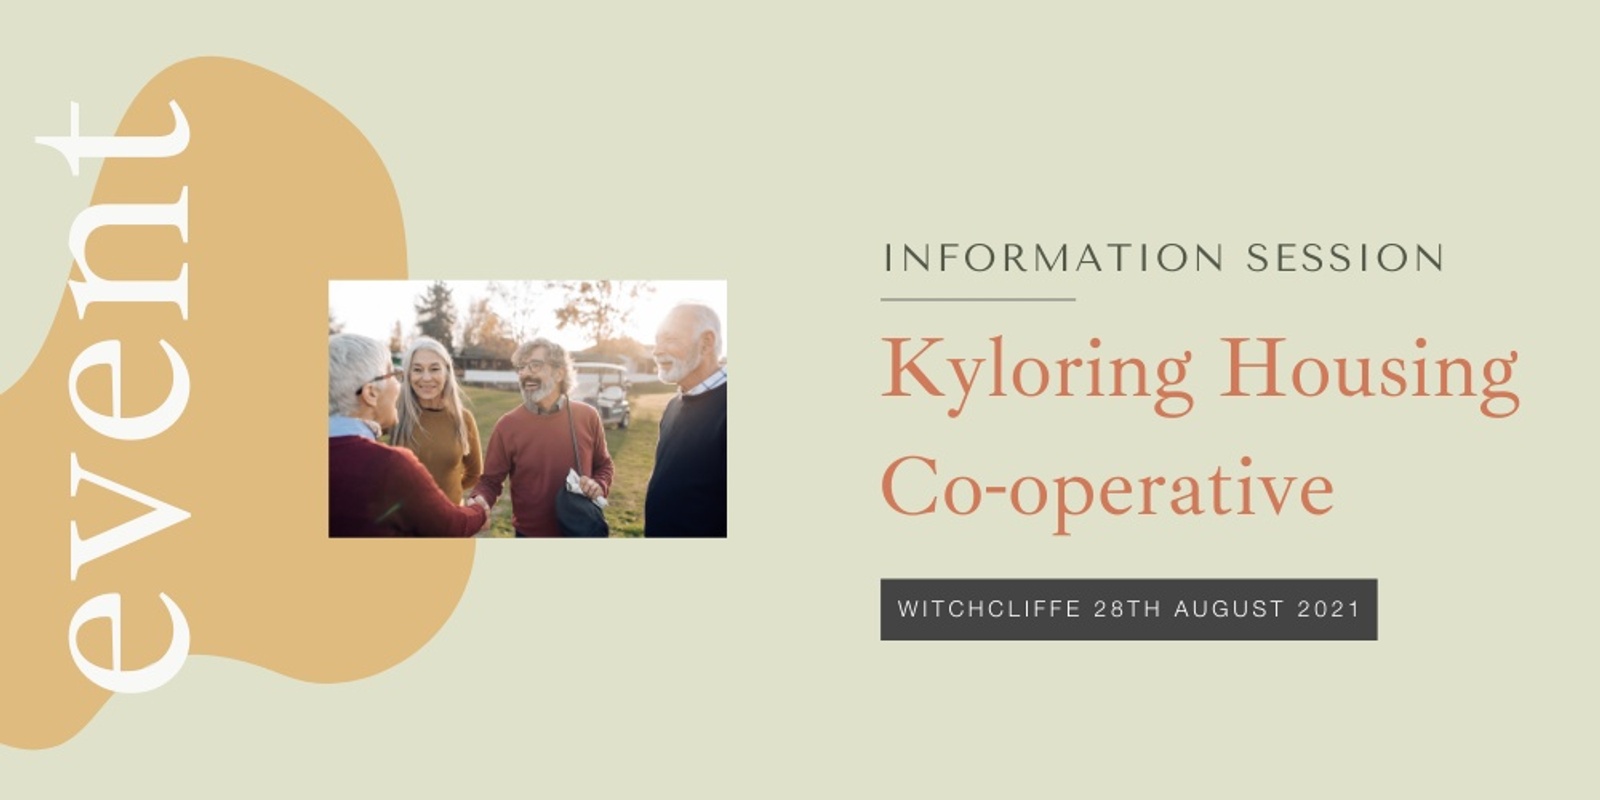 Banner image for Kyloring Housing Co-operative Information Session 28/8/21 - Witchcliffe